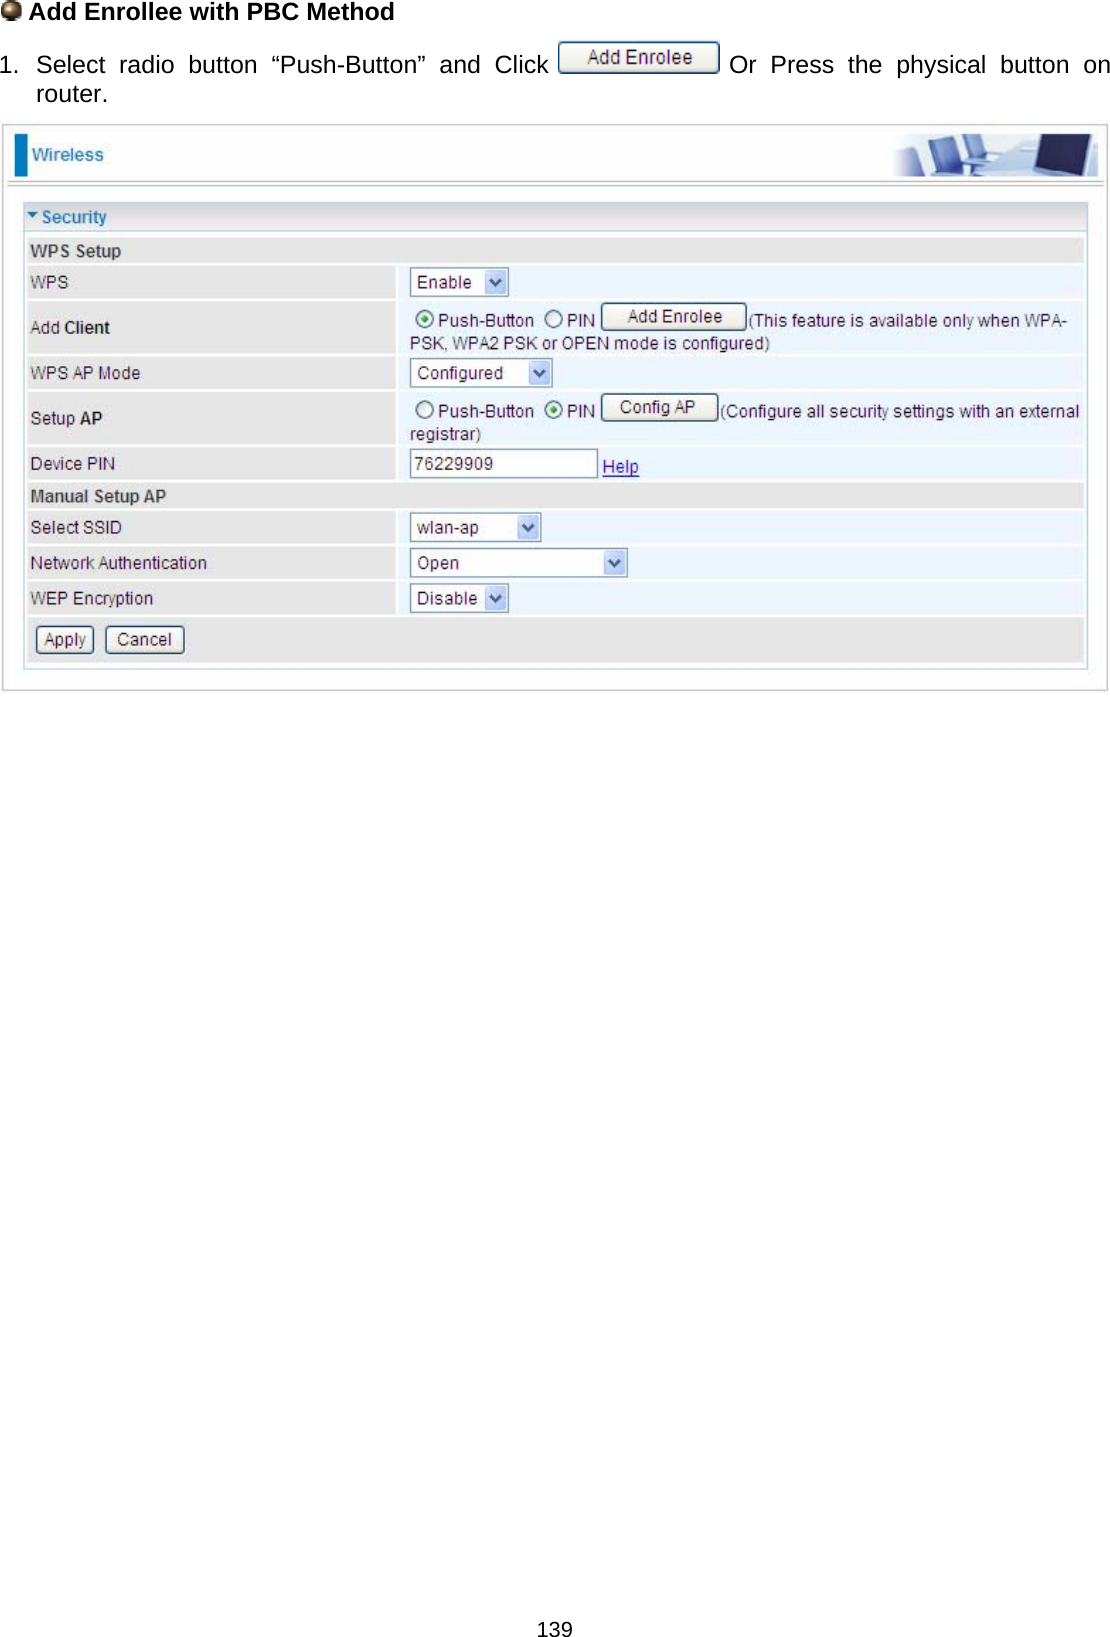  139  Add Enrollee with PBC Method 1. Select radio button “Push-Button” and Click   Or Press the physical button on router.                           